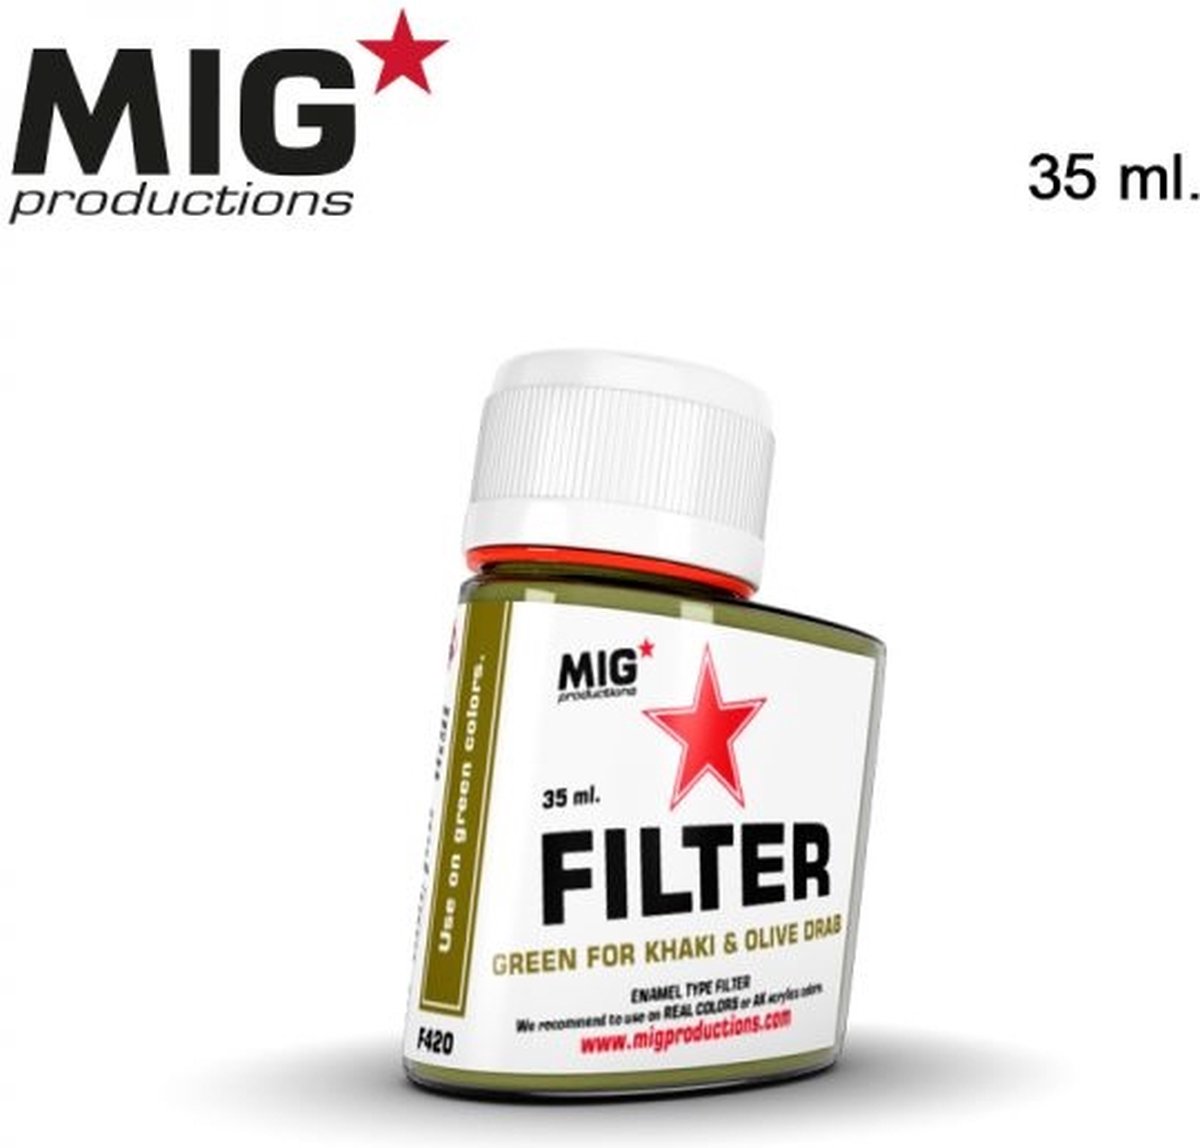 MIG Productions - F420 - Green Filter for Khaki & Olive Drab - 35ml -